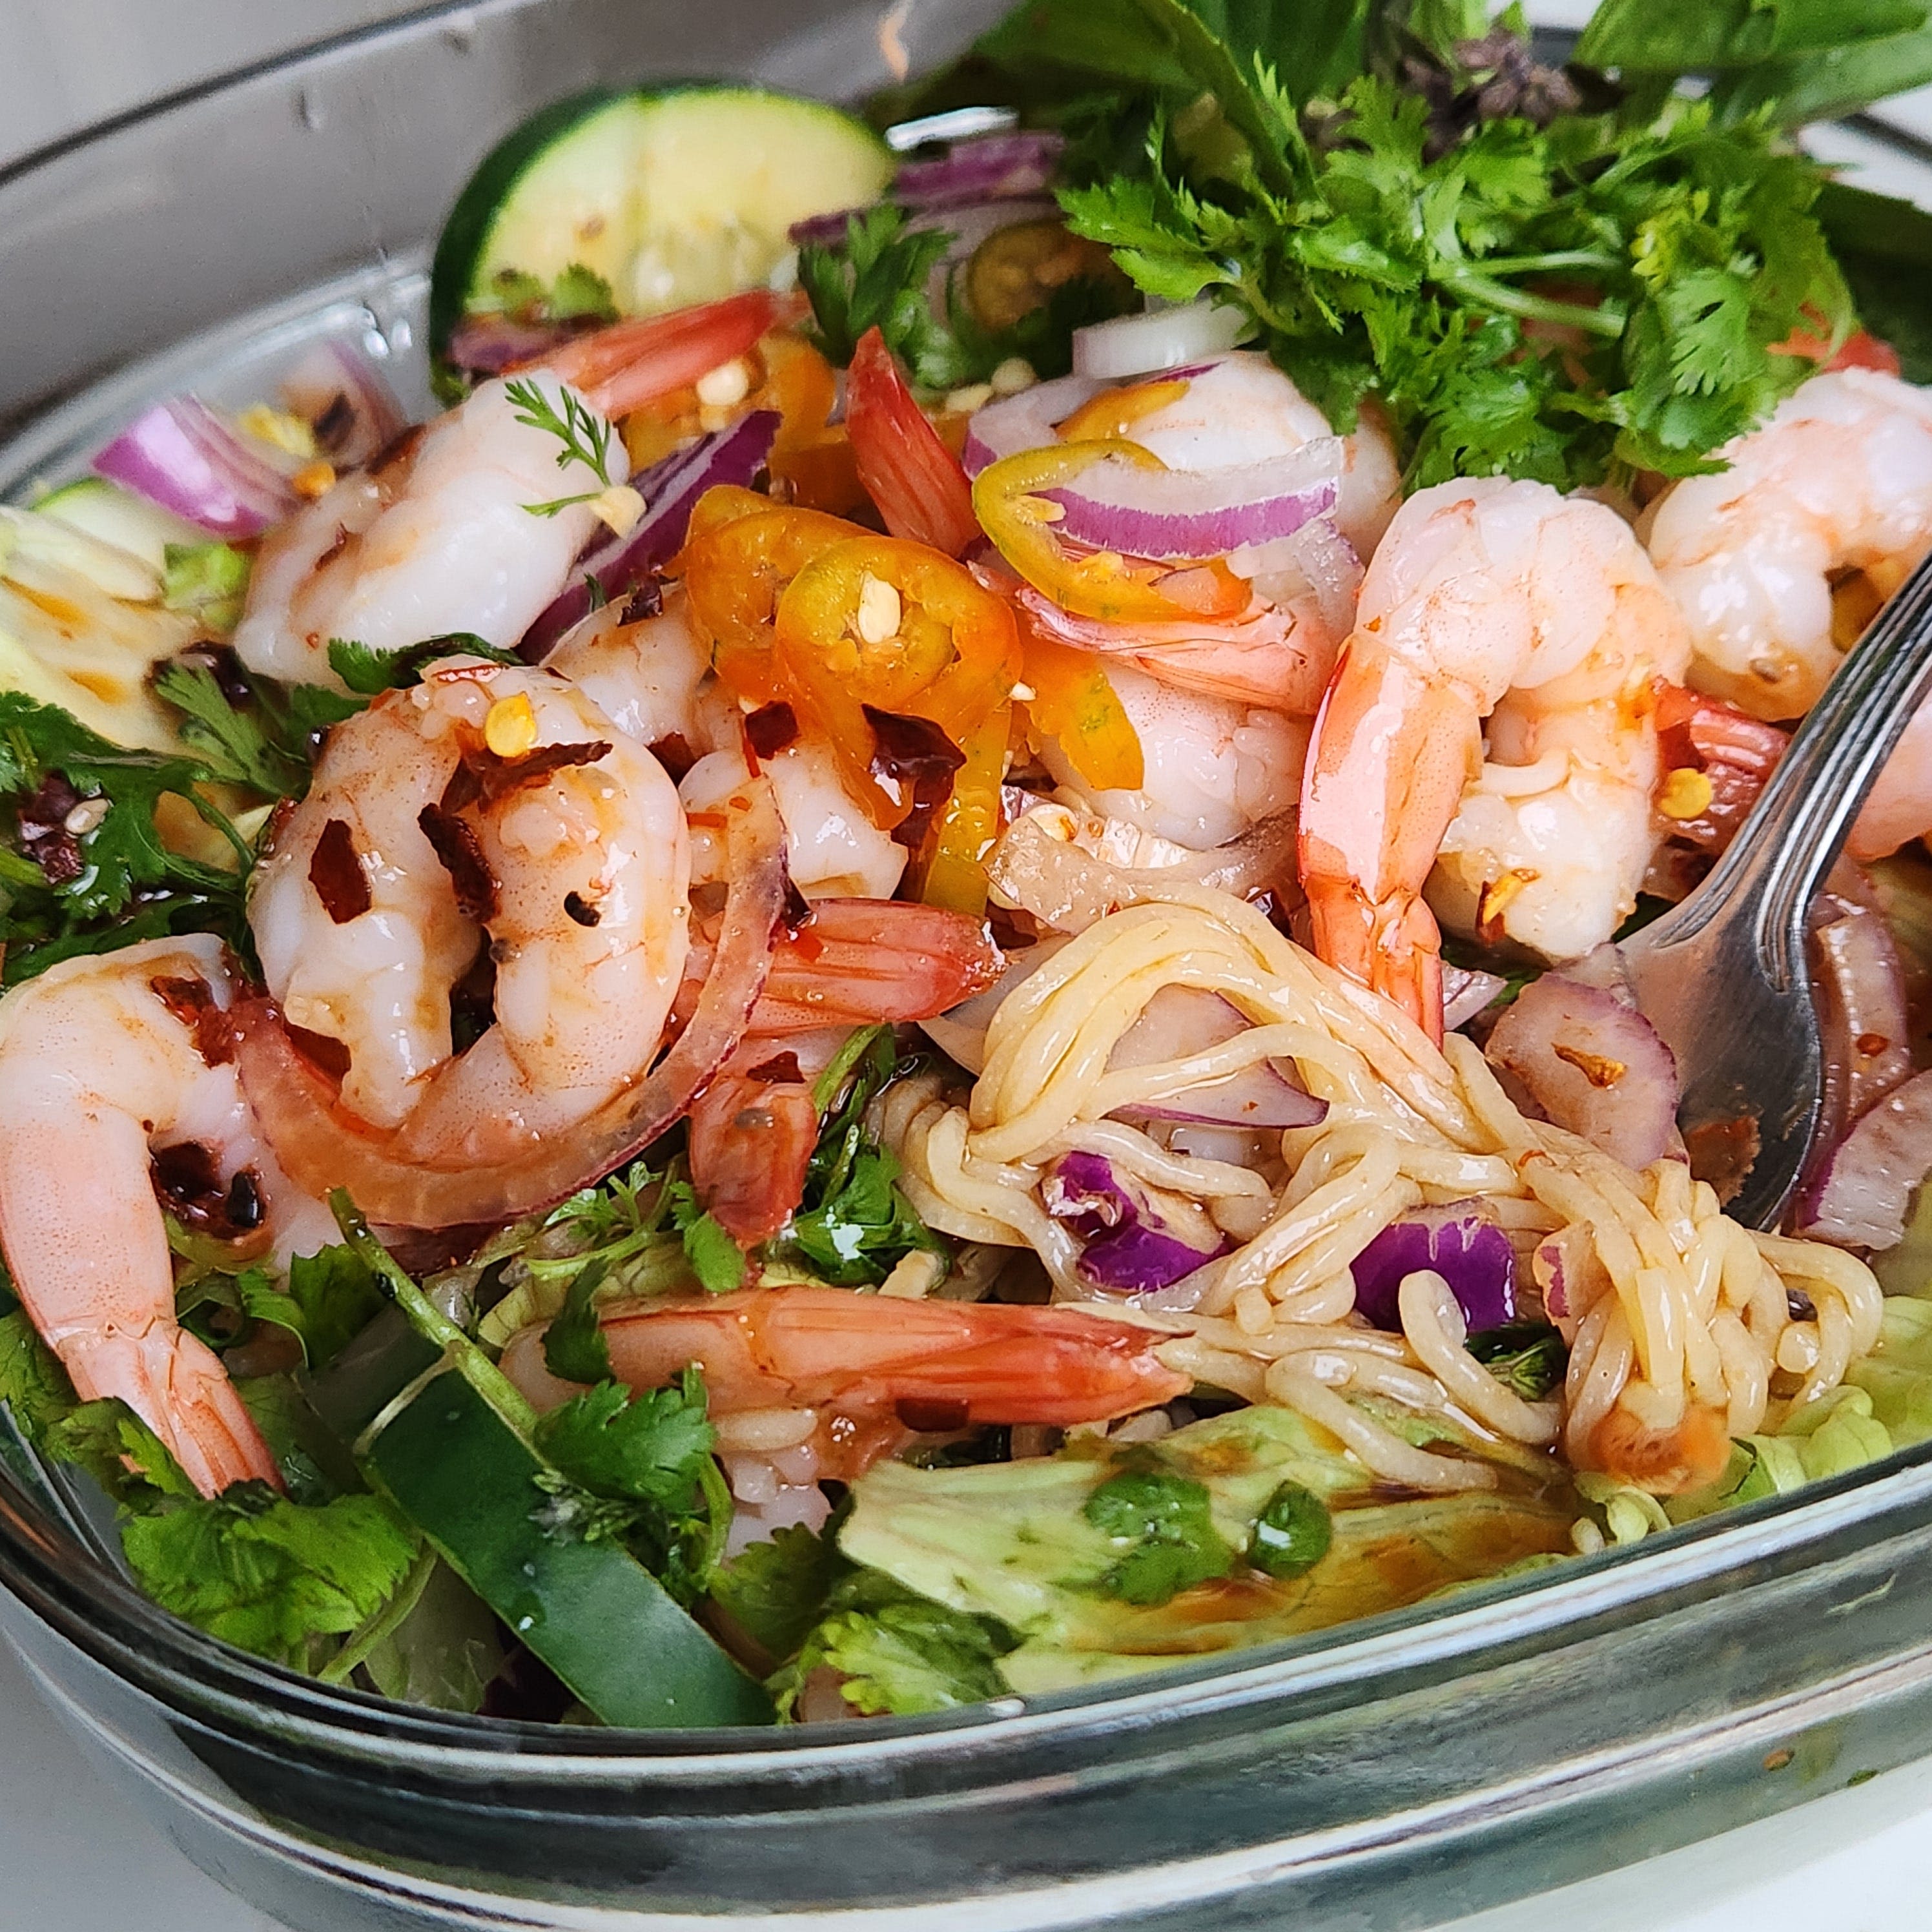 Enjoy this beautiful low-carb Thai shrimp and noodle salad that comes together in minutes